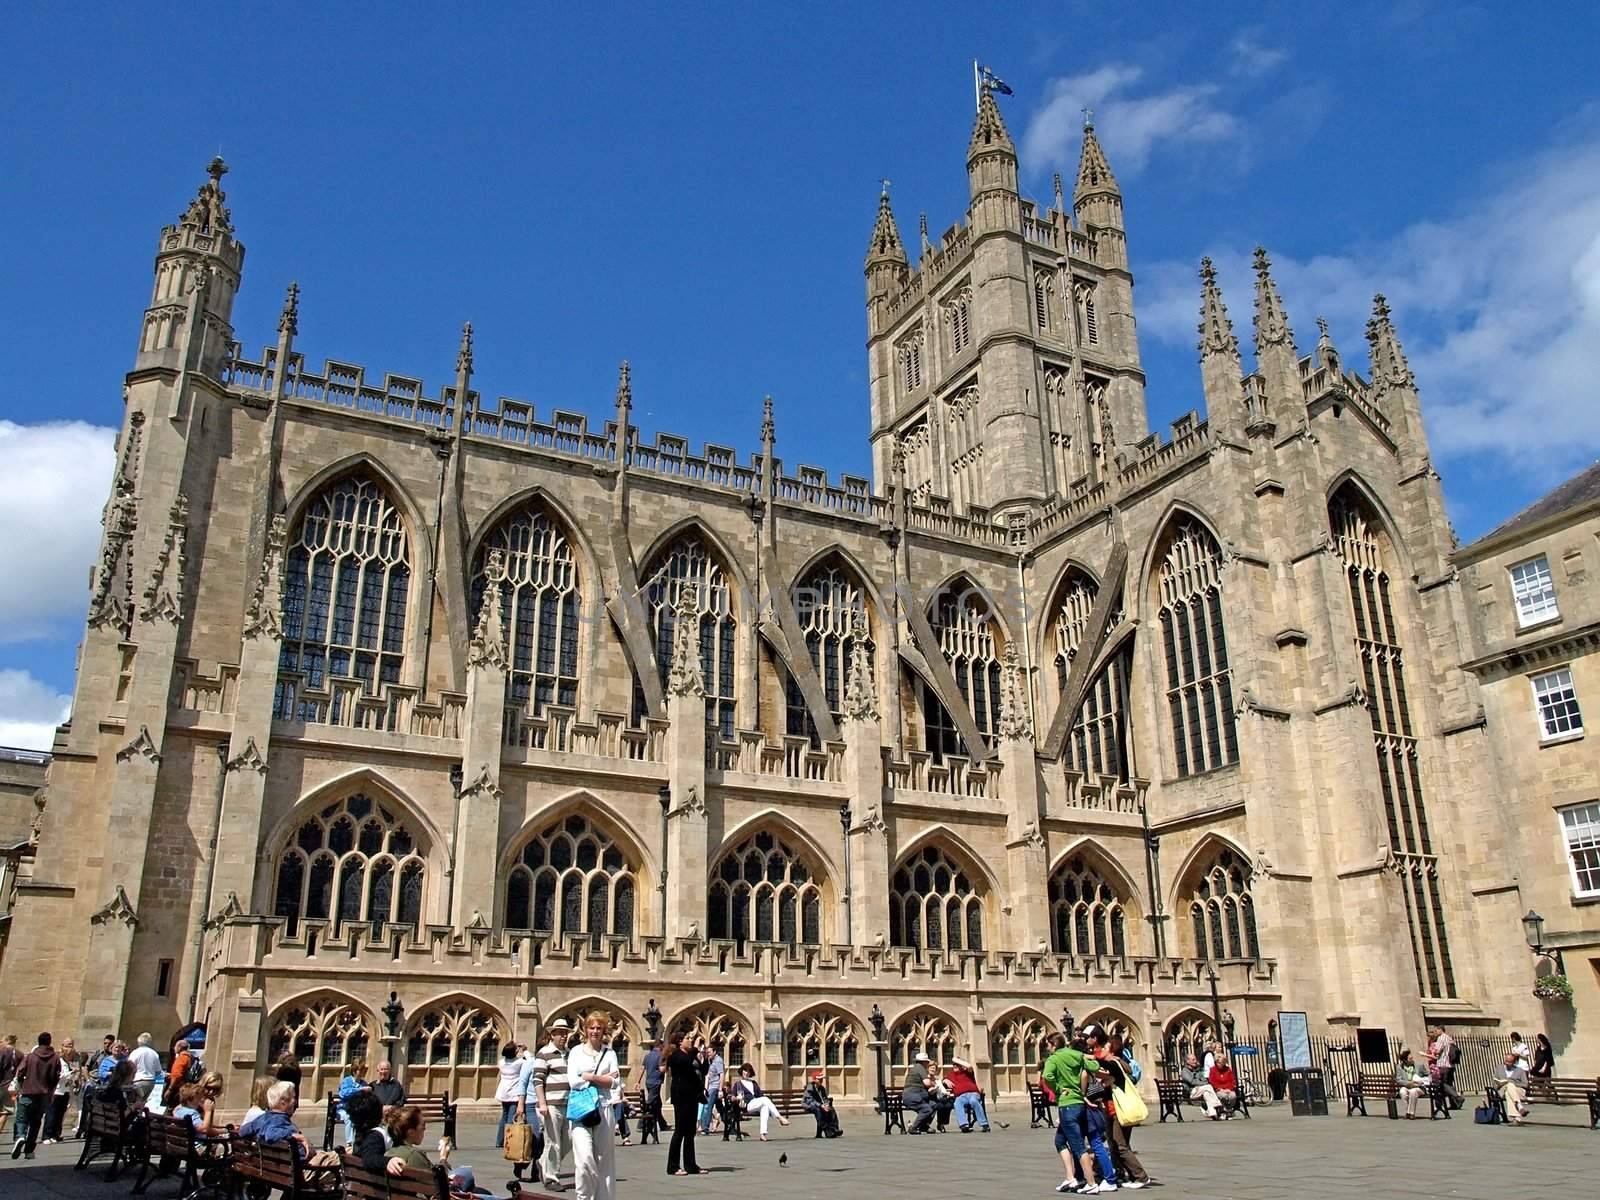 CITY OF BATH, ENGLAND � JULY 6: Tourists in the yard of the Bath Abbey, West England, July 6, 2009. The Bath Abbey is located near the famous Roman Bath Museum, a tourist attraction in this city.
